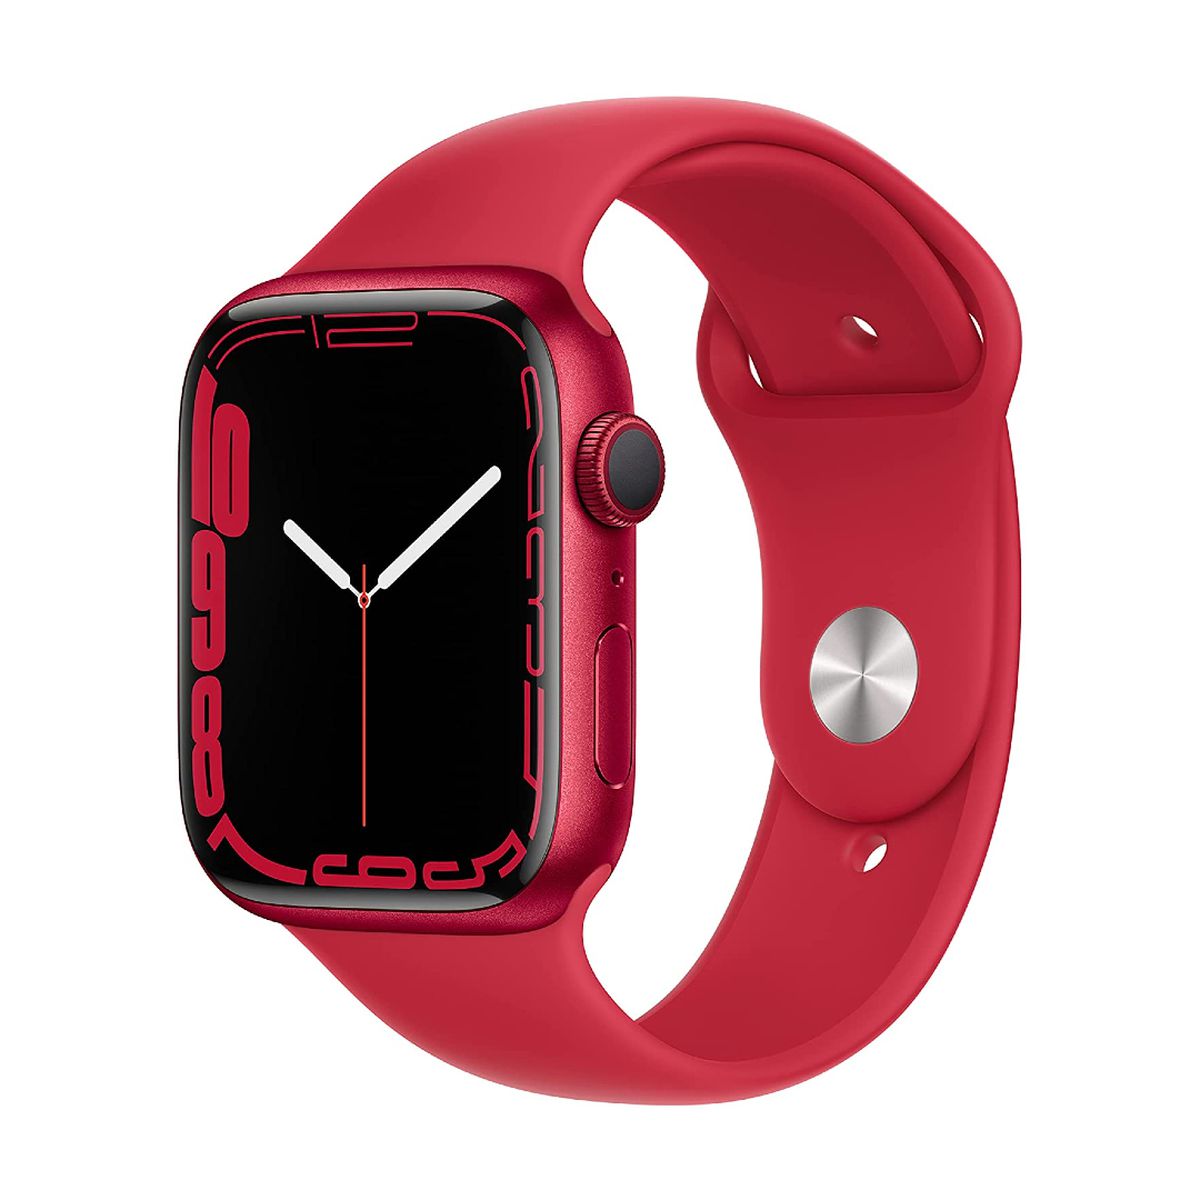 Apple Watch Series 7 Red Press Image